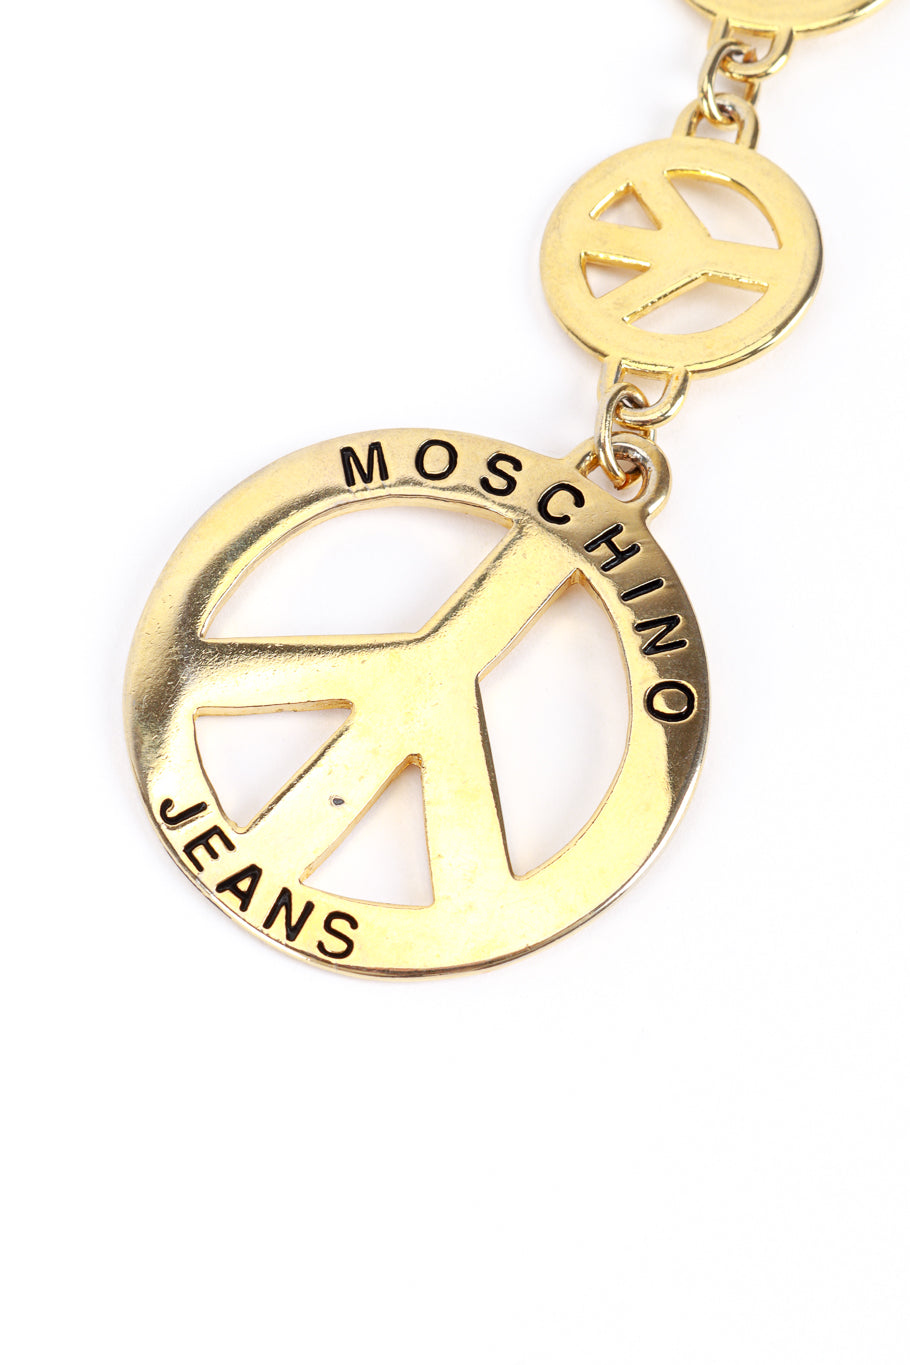 Vintage Moschino Jeans Peace Sign Draped Chain Belt II signature stamped end charm closeup @recess la